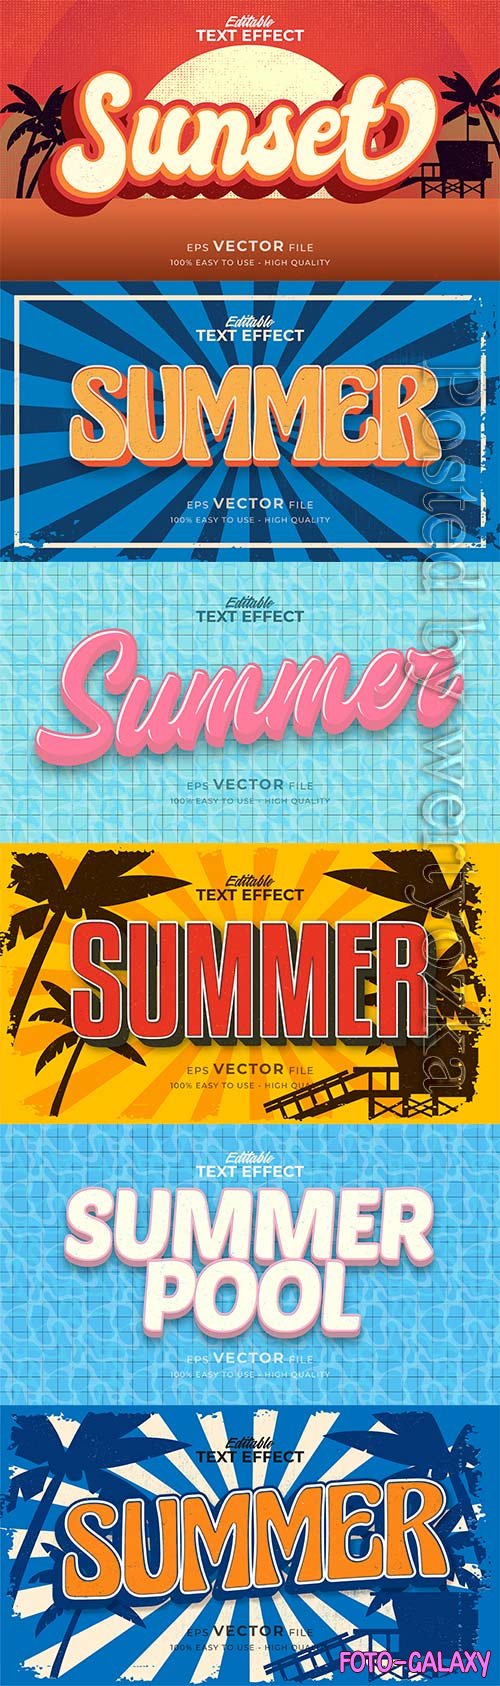 Retro summer holiday text in grunge style theme in vector vol 2